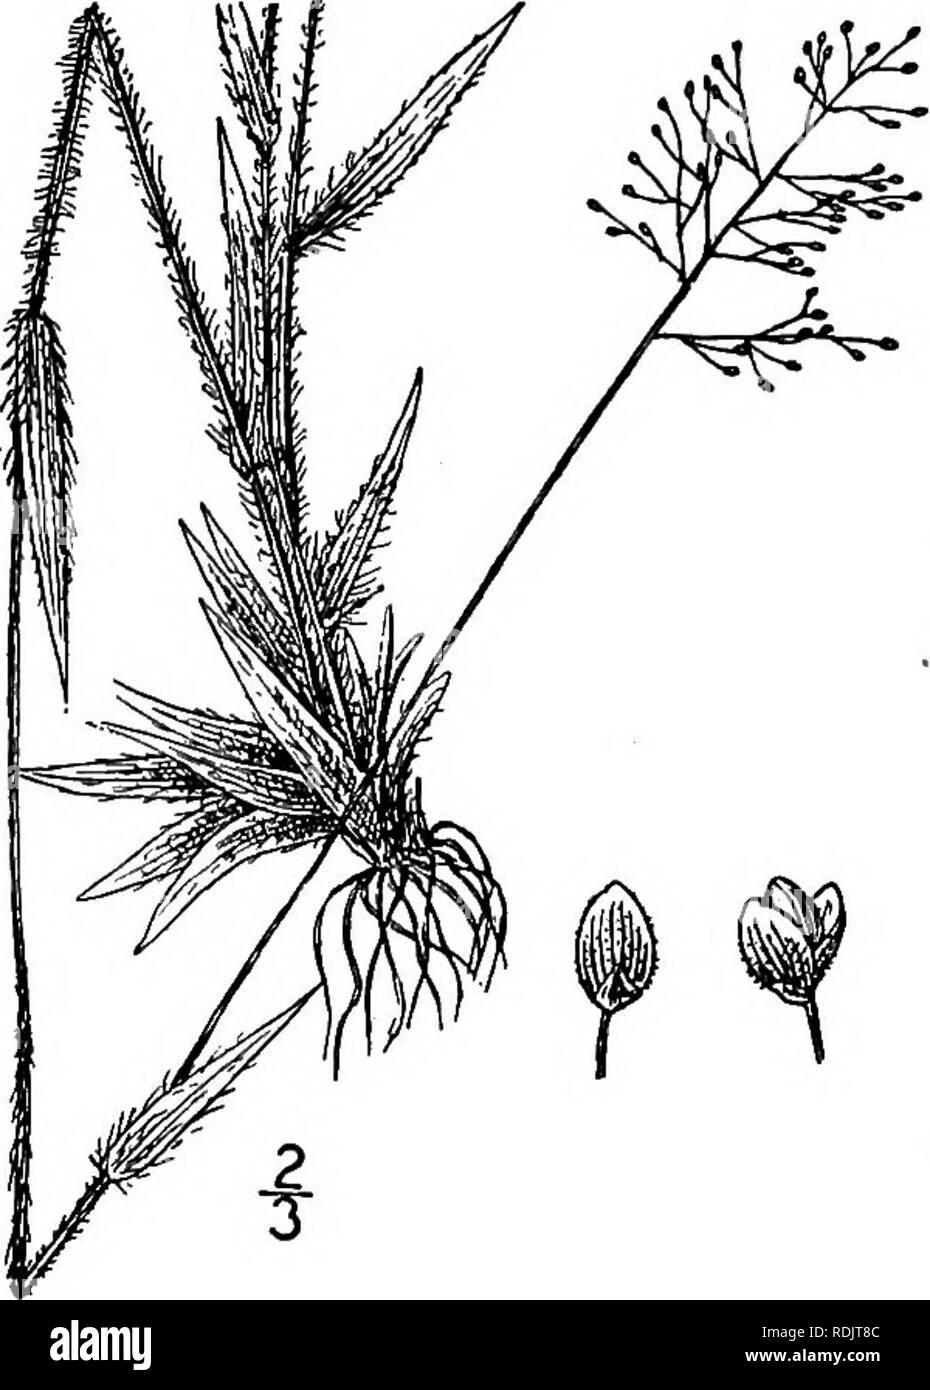 . An illustrated flora of the northern United States, Canada and the British possessions, from Newfoundland to the parallel of the southern boundary of Virginia, and from the Atlantic Ocean westward to the 102d meridian. Botany; Botany. 52. Panicum meridionale Ashe. Matting Panic-grass. Fig. 362. Panicum meridionale Ashe, Journ. E. Mitch. Sci. Soc. Soc. 15: 59- 1898. Panicum filiculme Ashe, Journ. E. Mitch. Sci. Soc. 15: 59. 1898. Not Hack. 1895. Panicum subvillosum Ashe, loc. cit. 16: 86. 1900. tPanicum albemarlense Ashe, loc. cit. 84. 1900. Panicum oricola Hitchc. &amp; Chase, Rhodora, 8: 20 Stock Photo